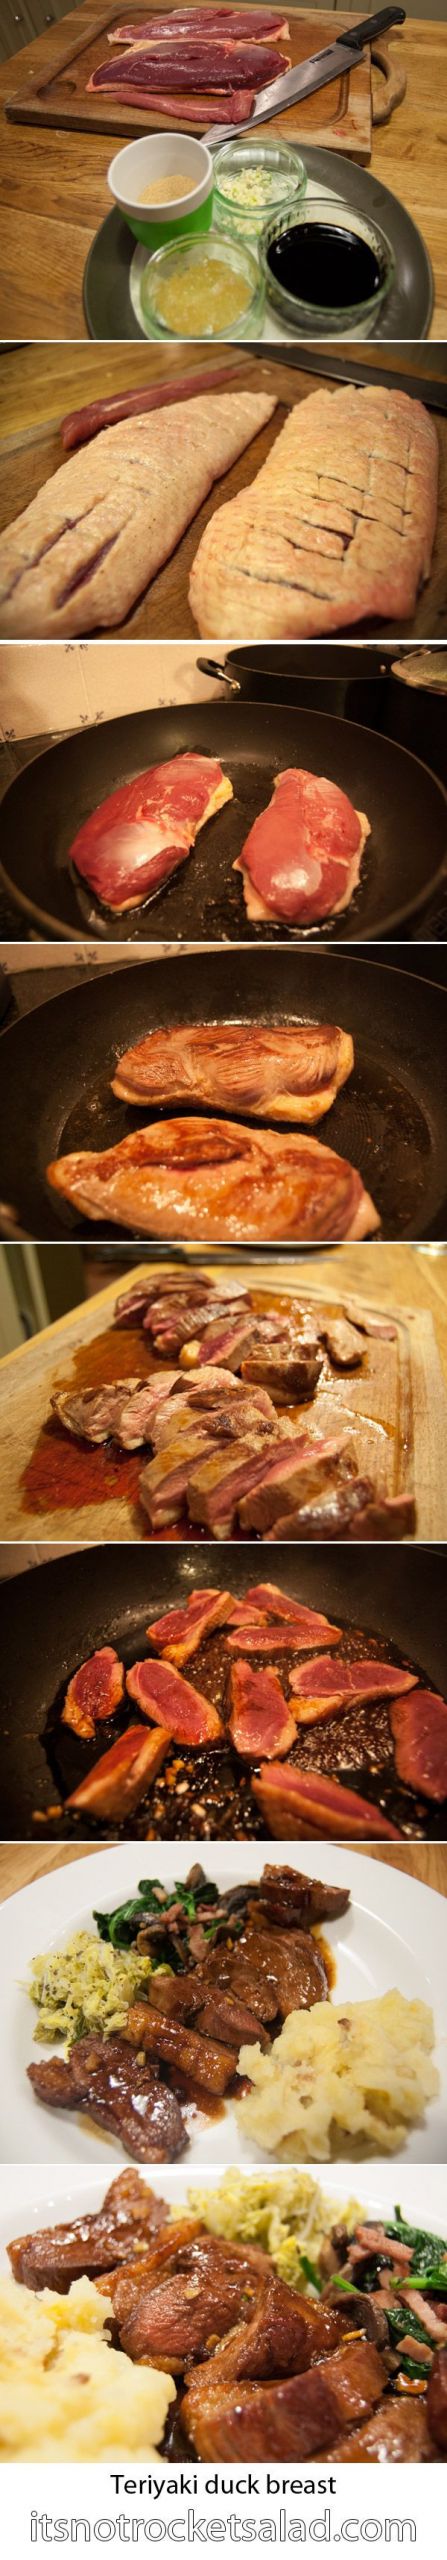 Easy Wild Duck Breast Recipes
 30 best Christmas dinner main dish images on Pinterest